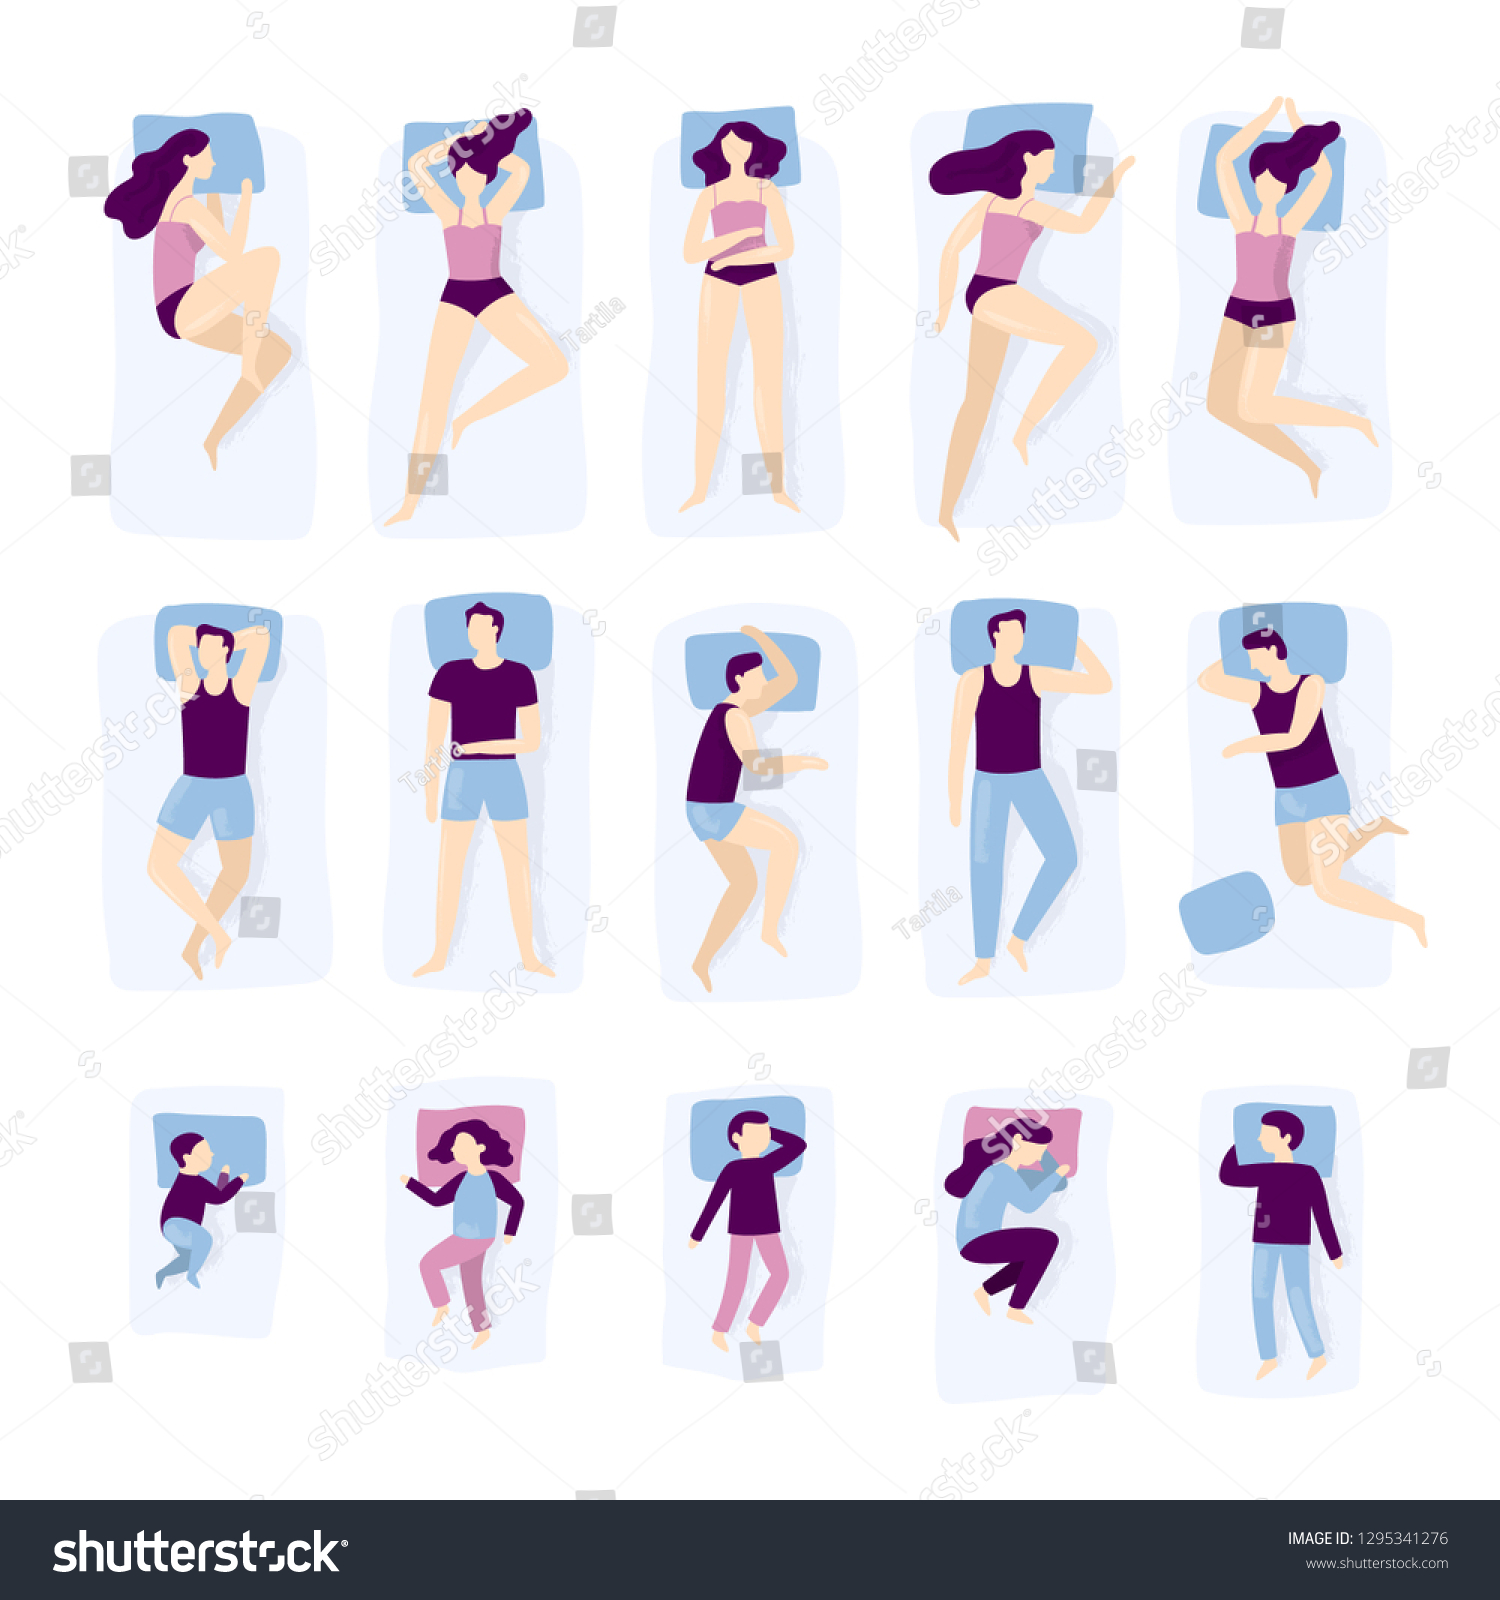 SVG of People sleeping poses. Adult and child sleep pose. Man on pillow, woman and young kids sleeping in bed. Sleep position, person bedding dreaming. Isolated vector illustration icons set svg